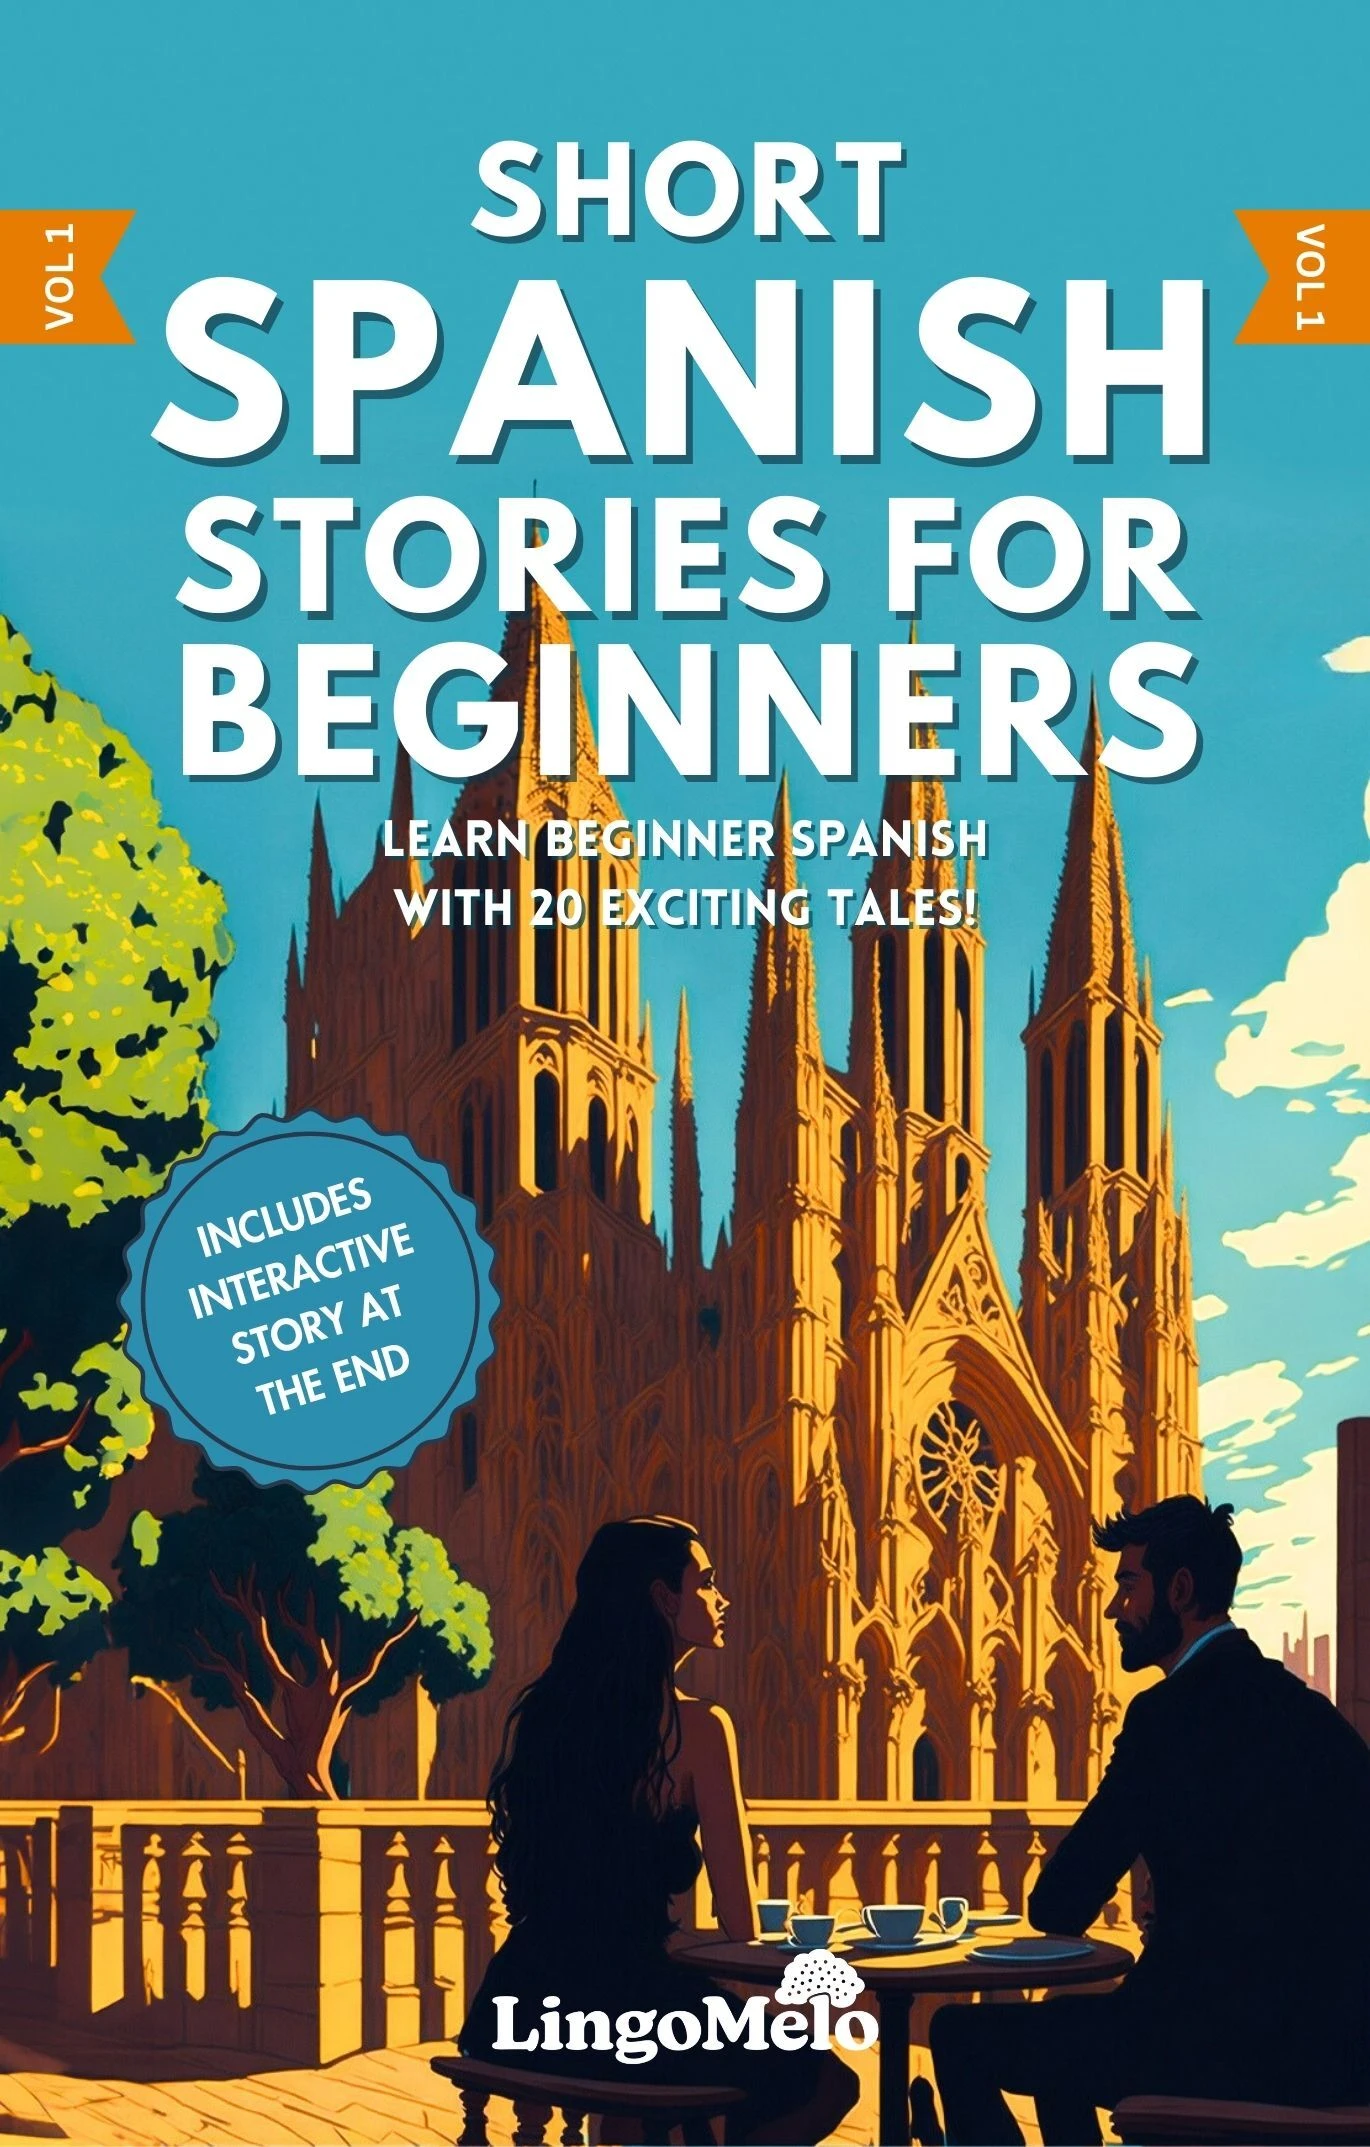 Short Spanish Stories for Beginners: Learn Beginner Spanish With 20 Exciting Tales! (Easy Spanish Lessons) (Spanish Edition)